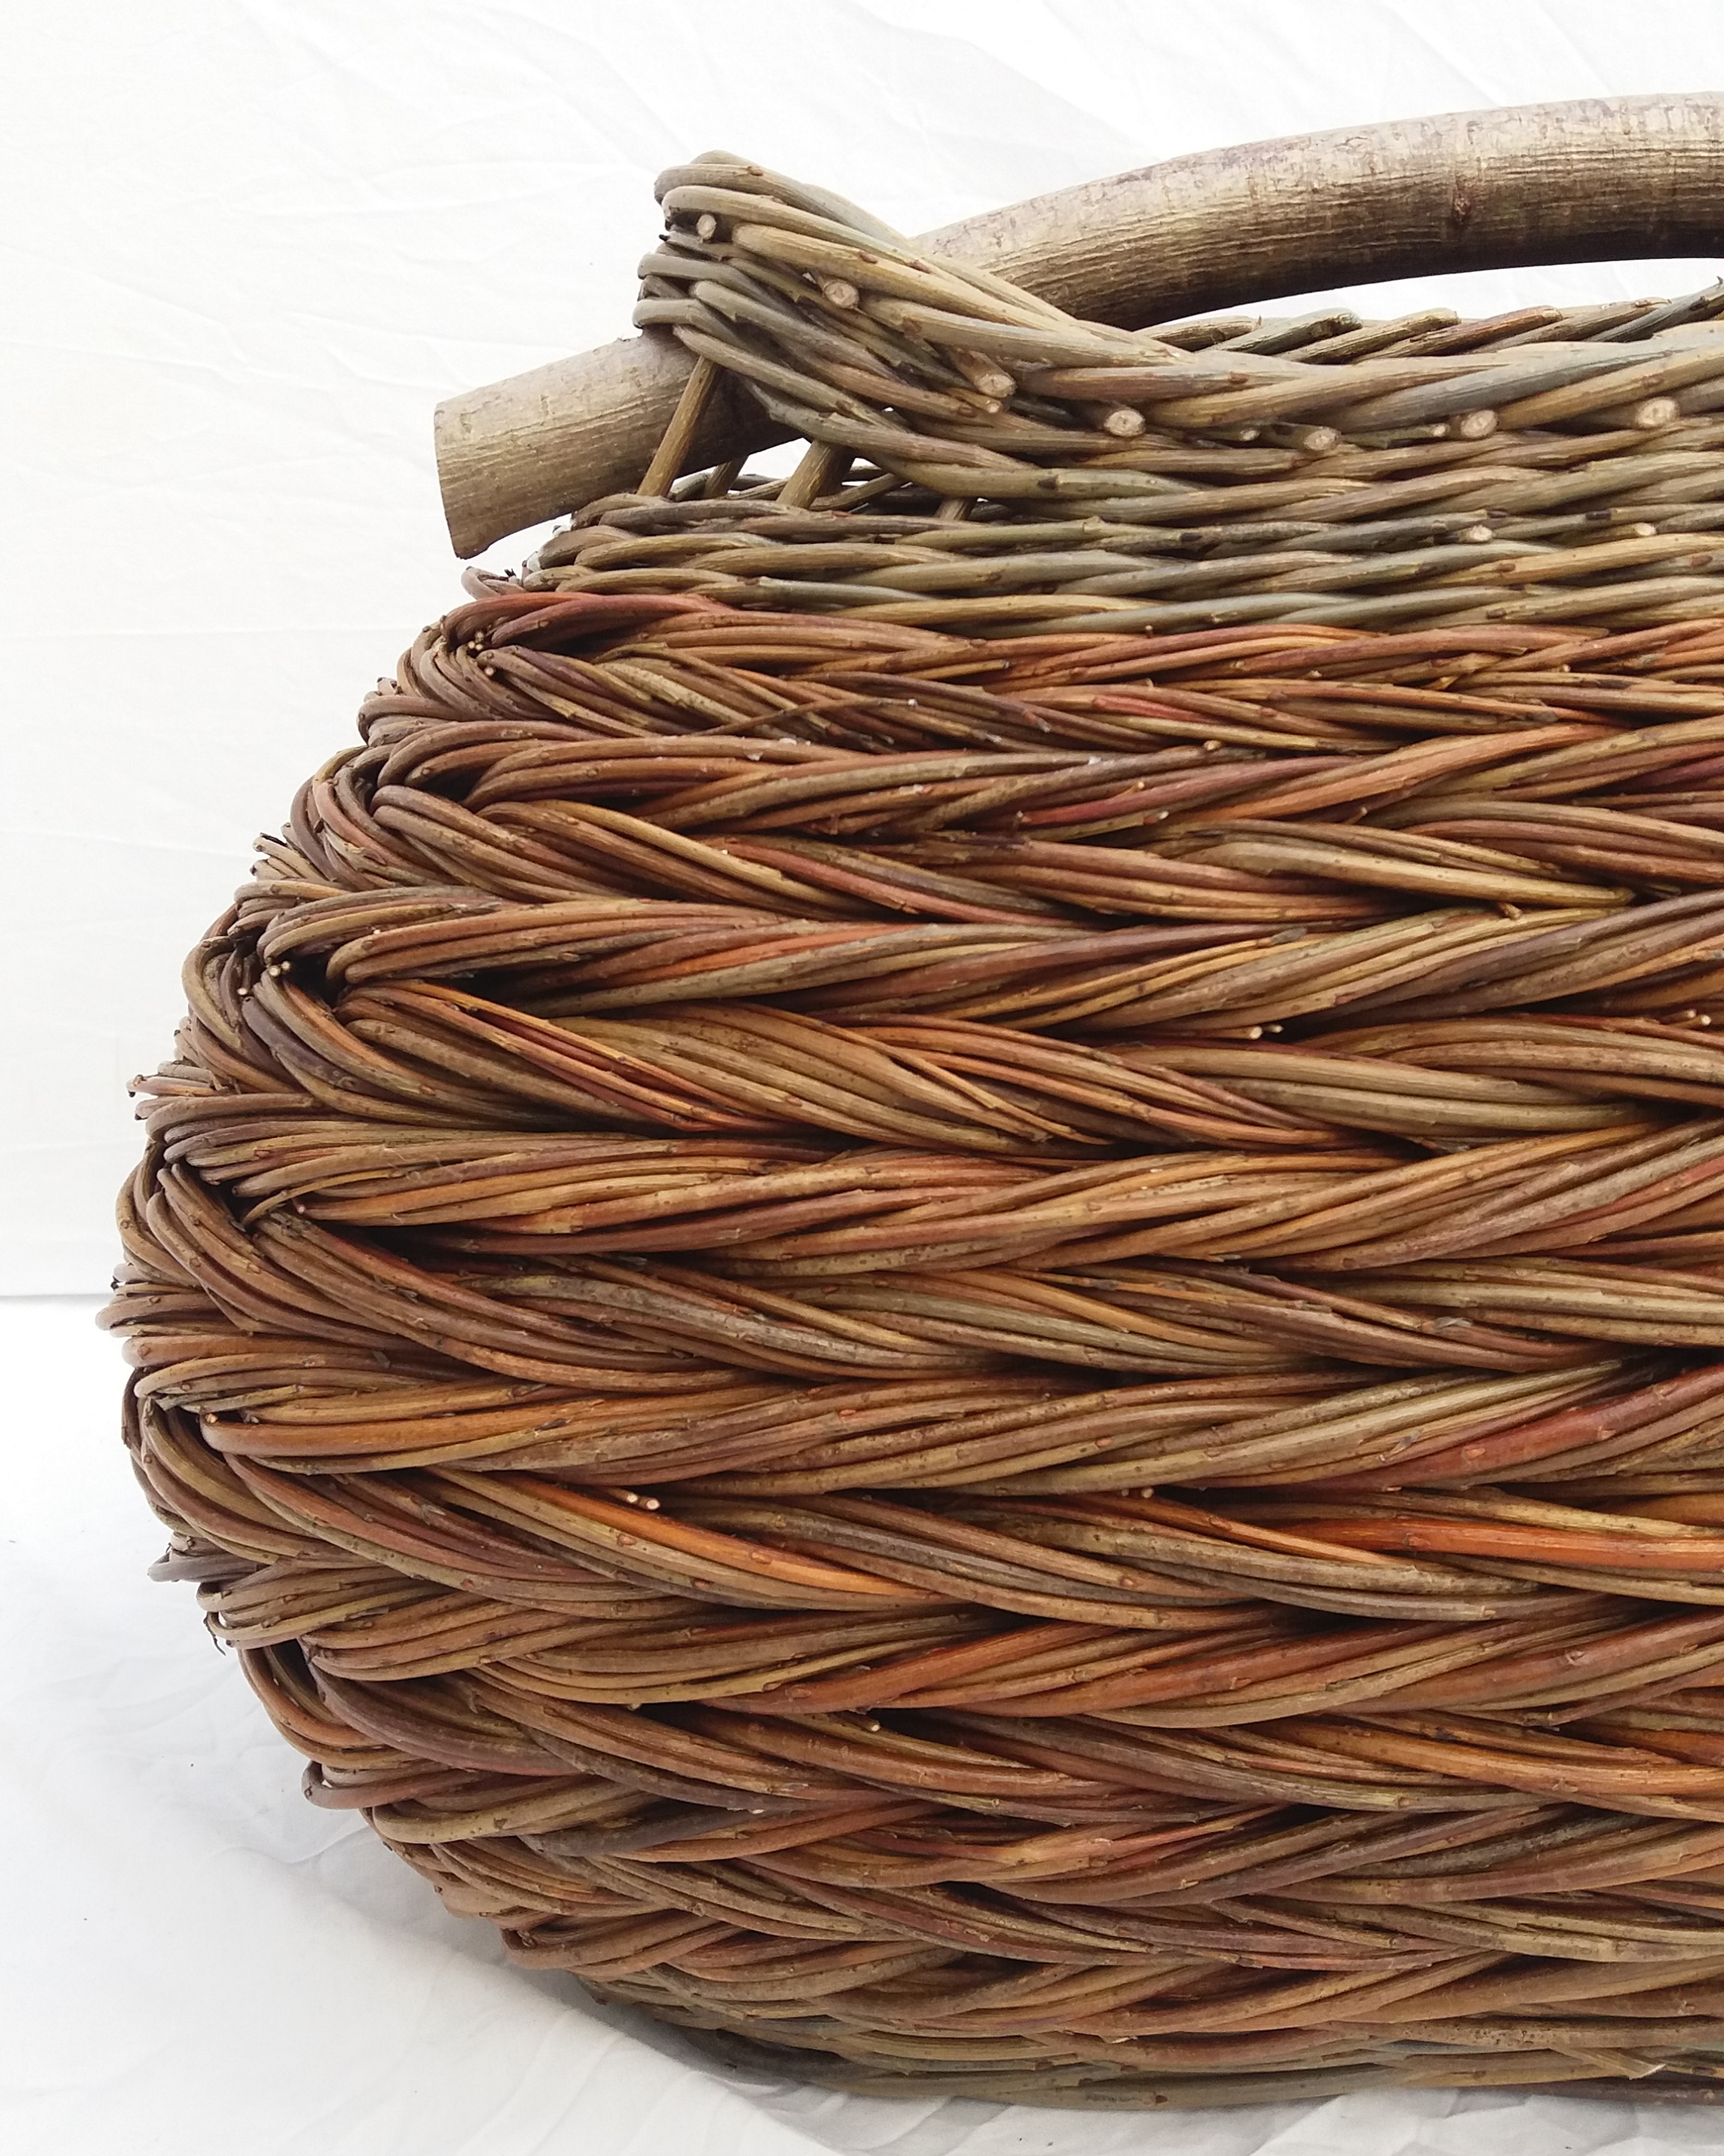 Contemporary Baskets for Houghton Hall , The Stables. Norfolk By Design 2019